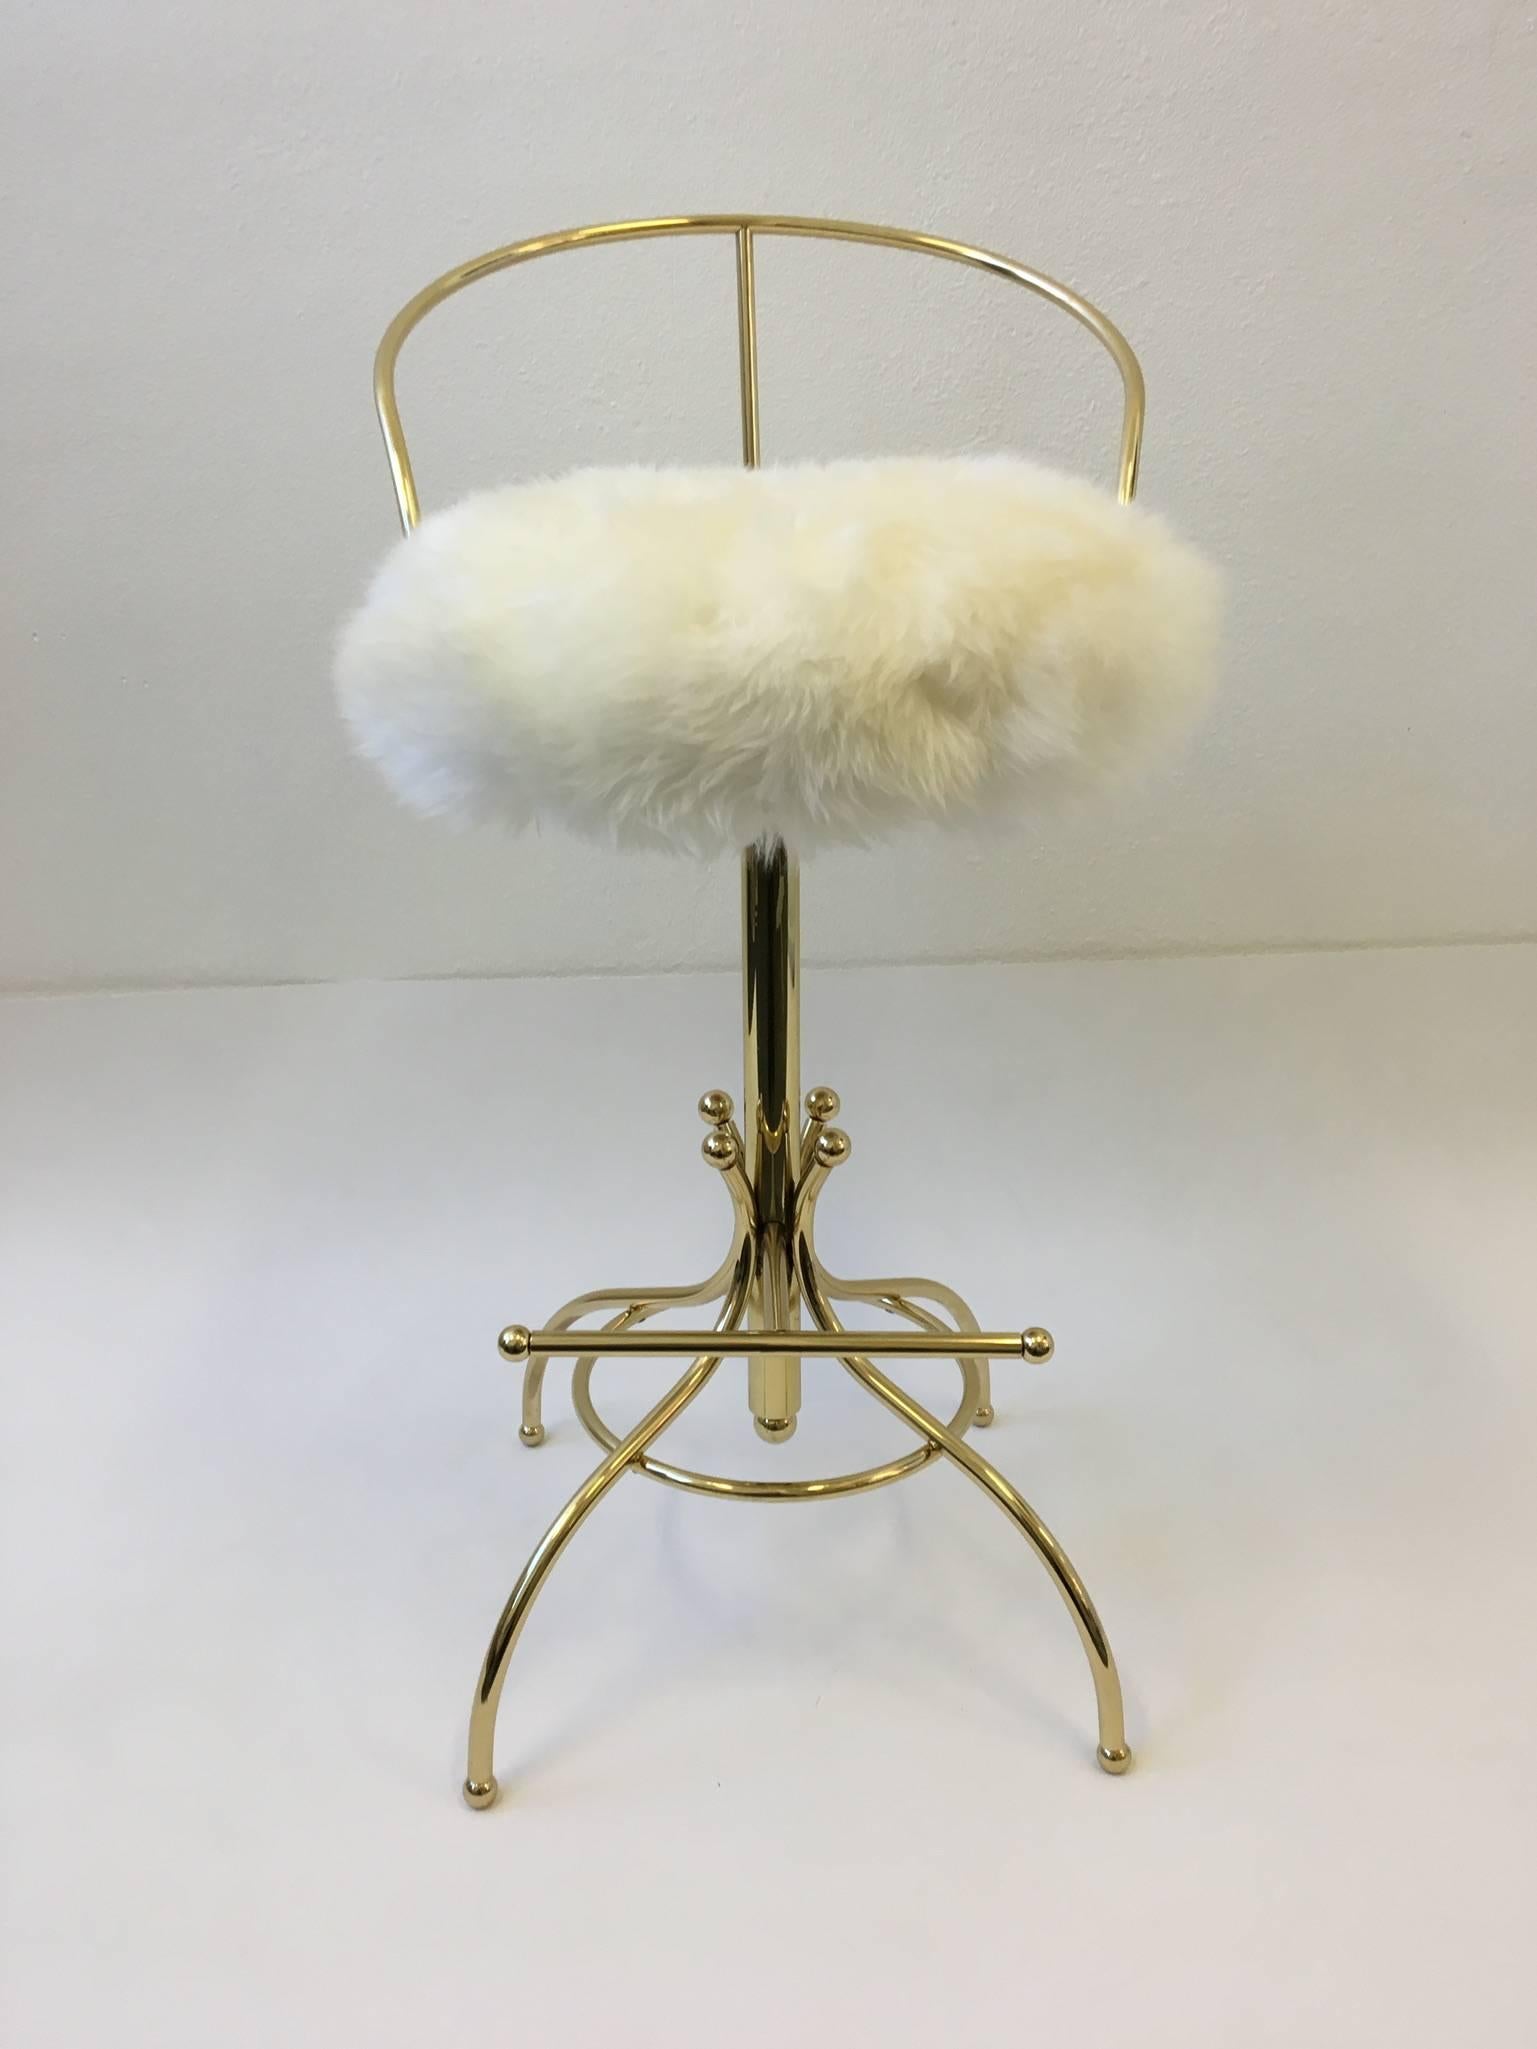 A glamorous polish brass swivel Sammy Davis bar stool, part of the Ball line designed by Charles Hollis Jones for Hudson Rissman in the 1960s. The stool swivels 360. Newly replated and reupholstered with sheepskin. 
Dimensions: 36.5